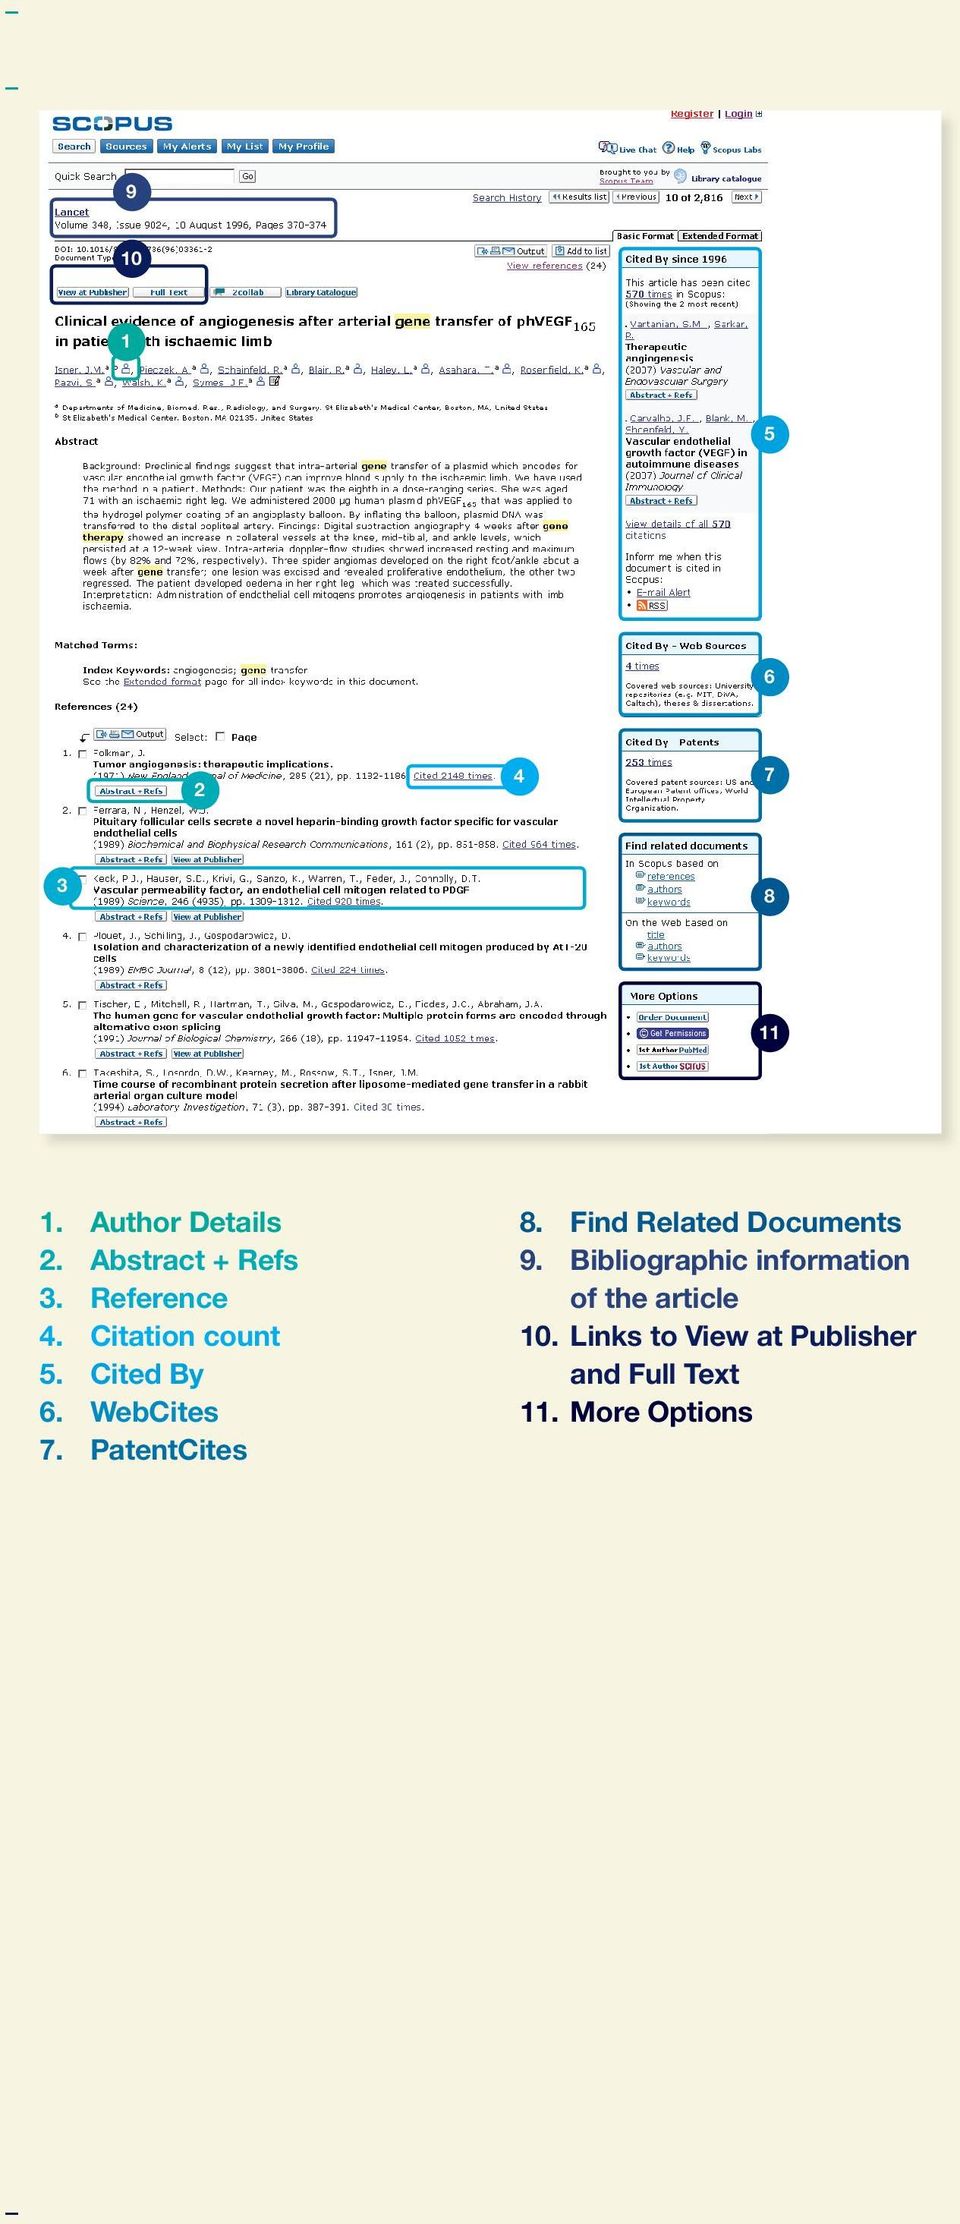 Find Related Documents 9.